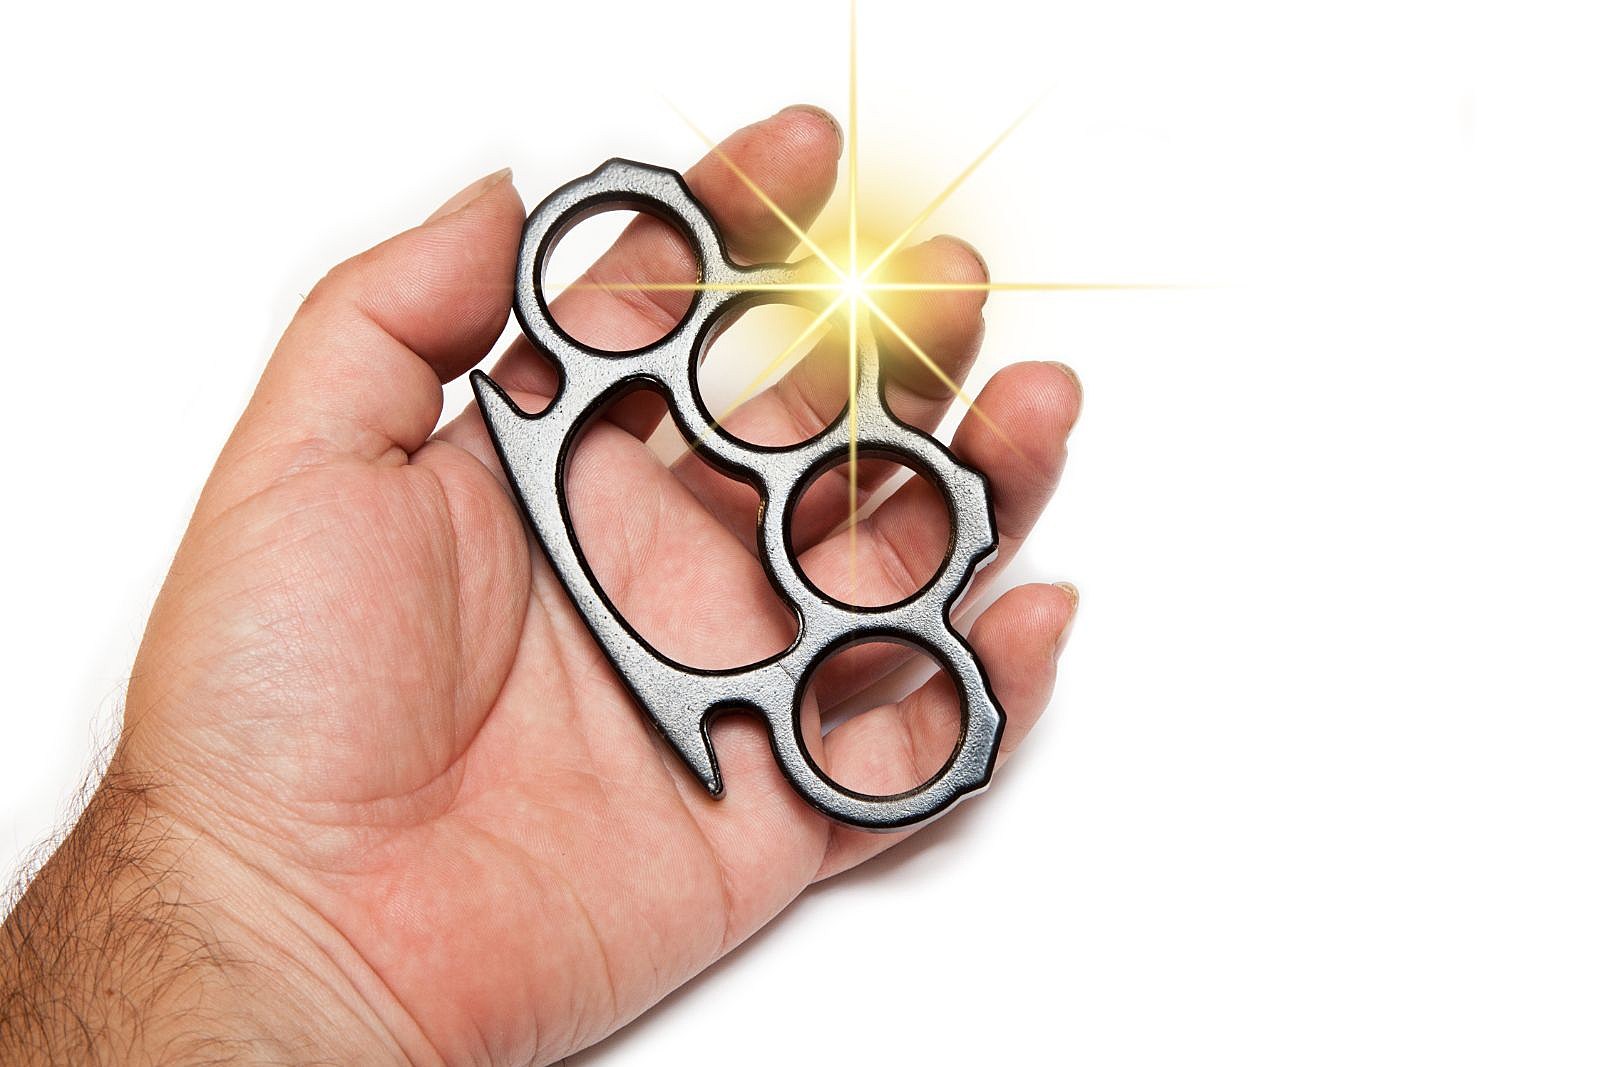 Is it illegal to own knuckle dusters? - Quora